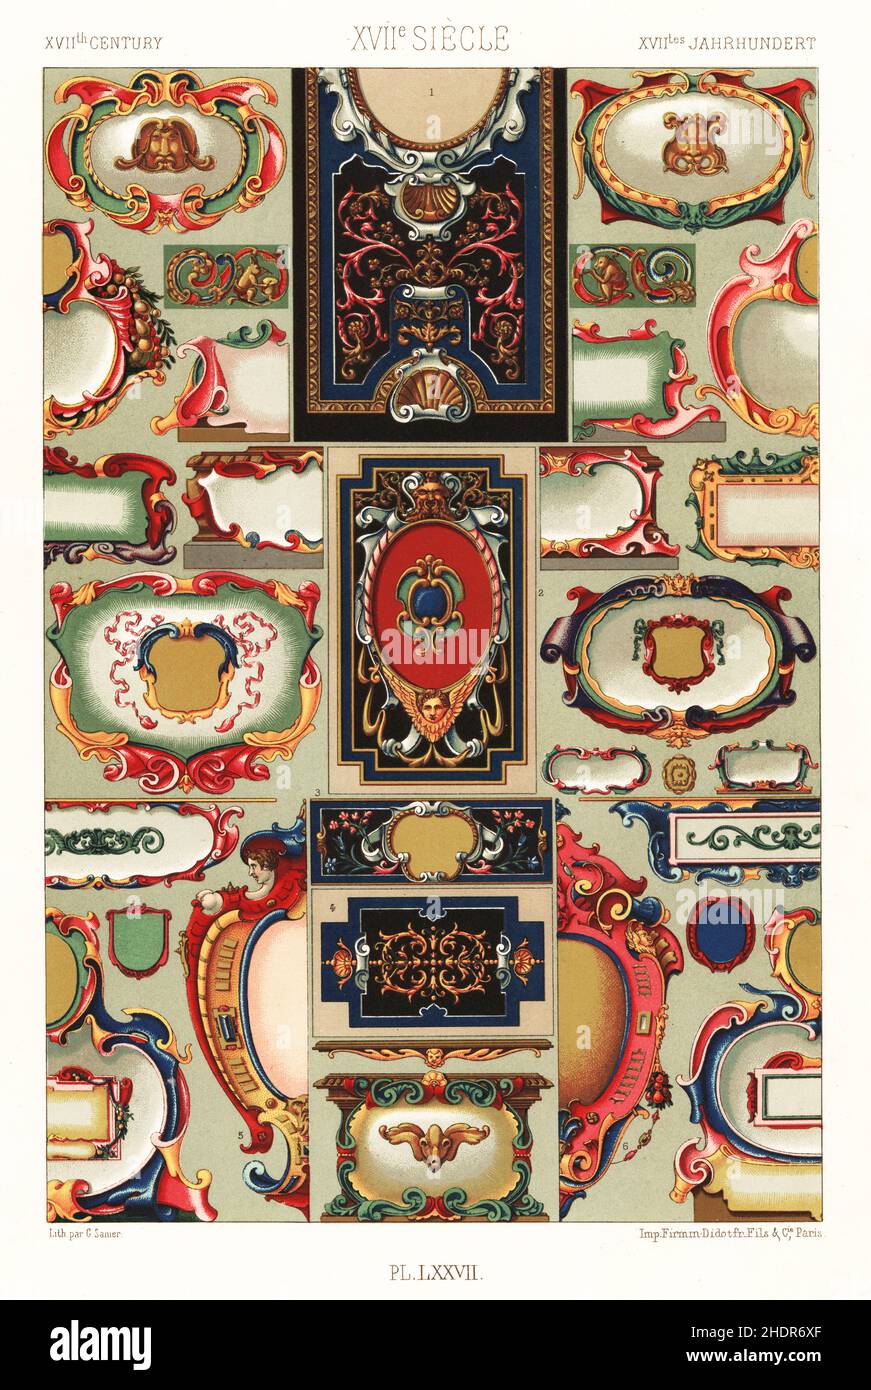 Cartouches, 17th century. Cartouches from panels at the Chapelle d'HInisdal 1-4, cartouches from Bernardus Castellus 5,6, and others from Flemish maps. Masks from Flanders. XVIIme Siecle. Hand-finished chromolithograph by G. Sanier from Albert-Charles-Auguste Racinet’s L’Ornement Polychrome, (Polychromatic Ornament), Firmin-Didot, Paris, 1869-73. Stock Photo